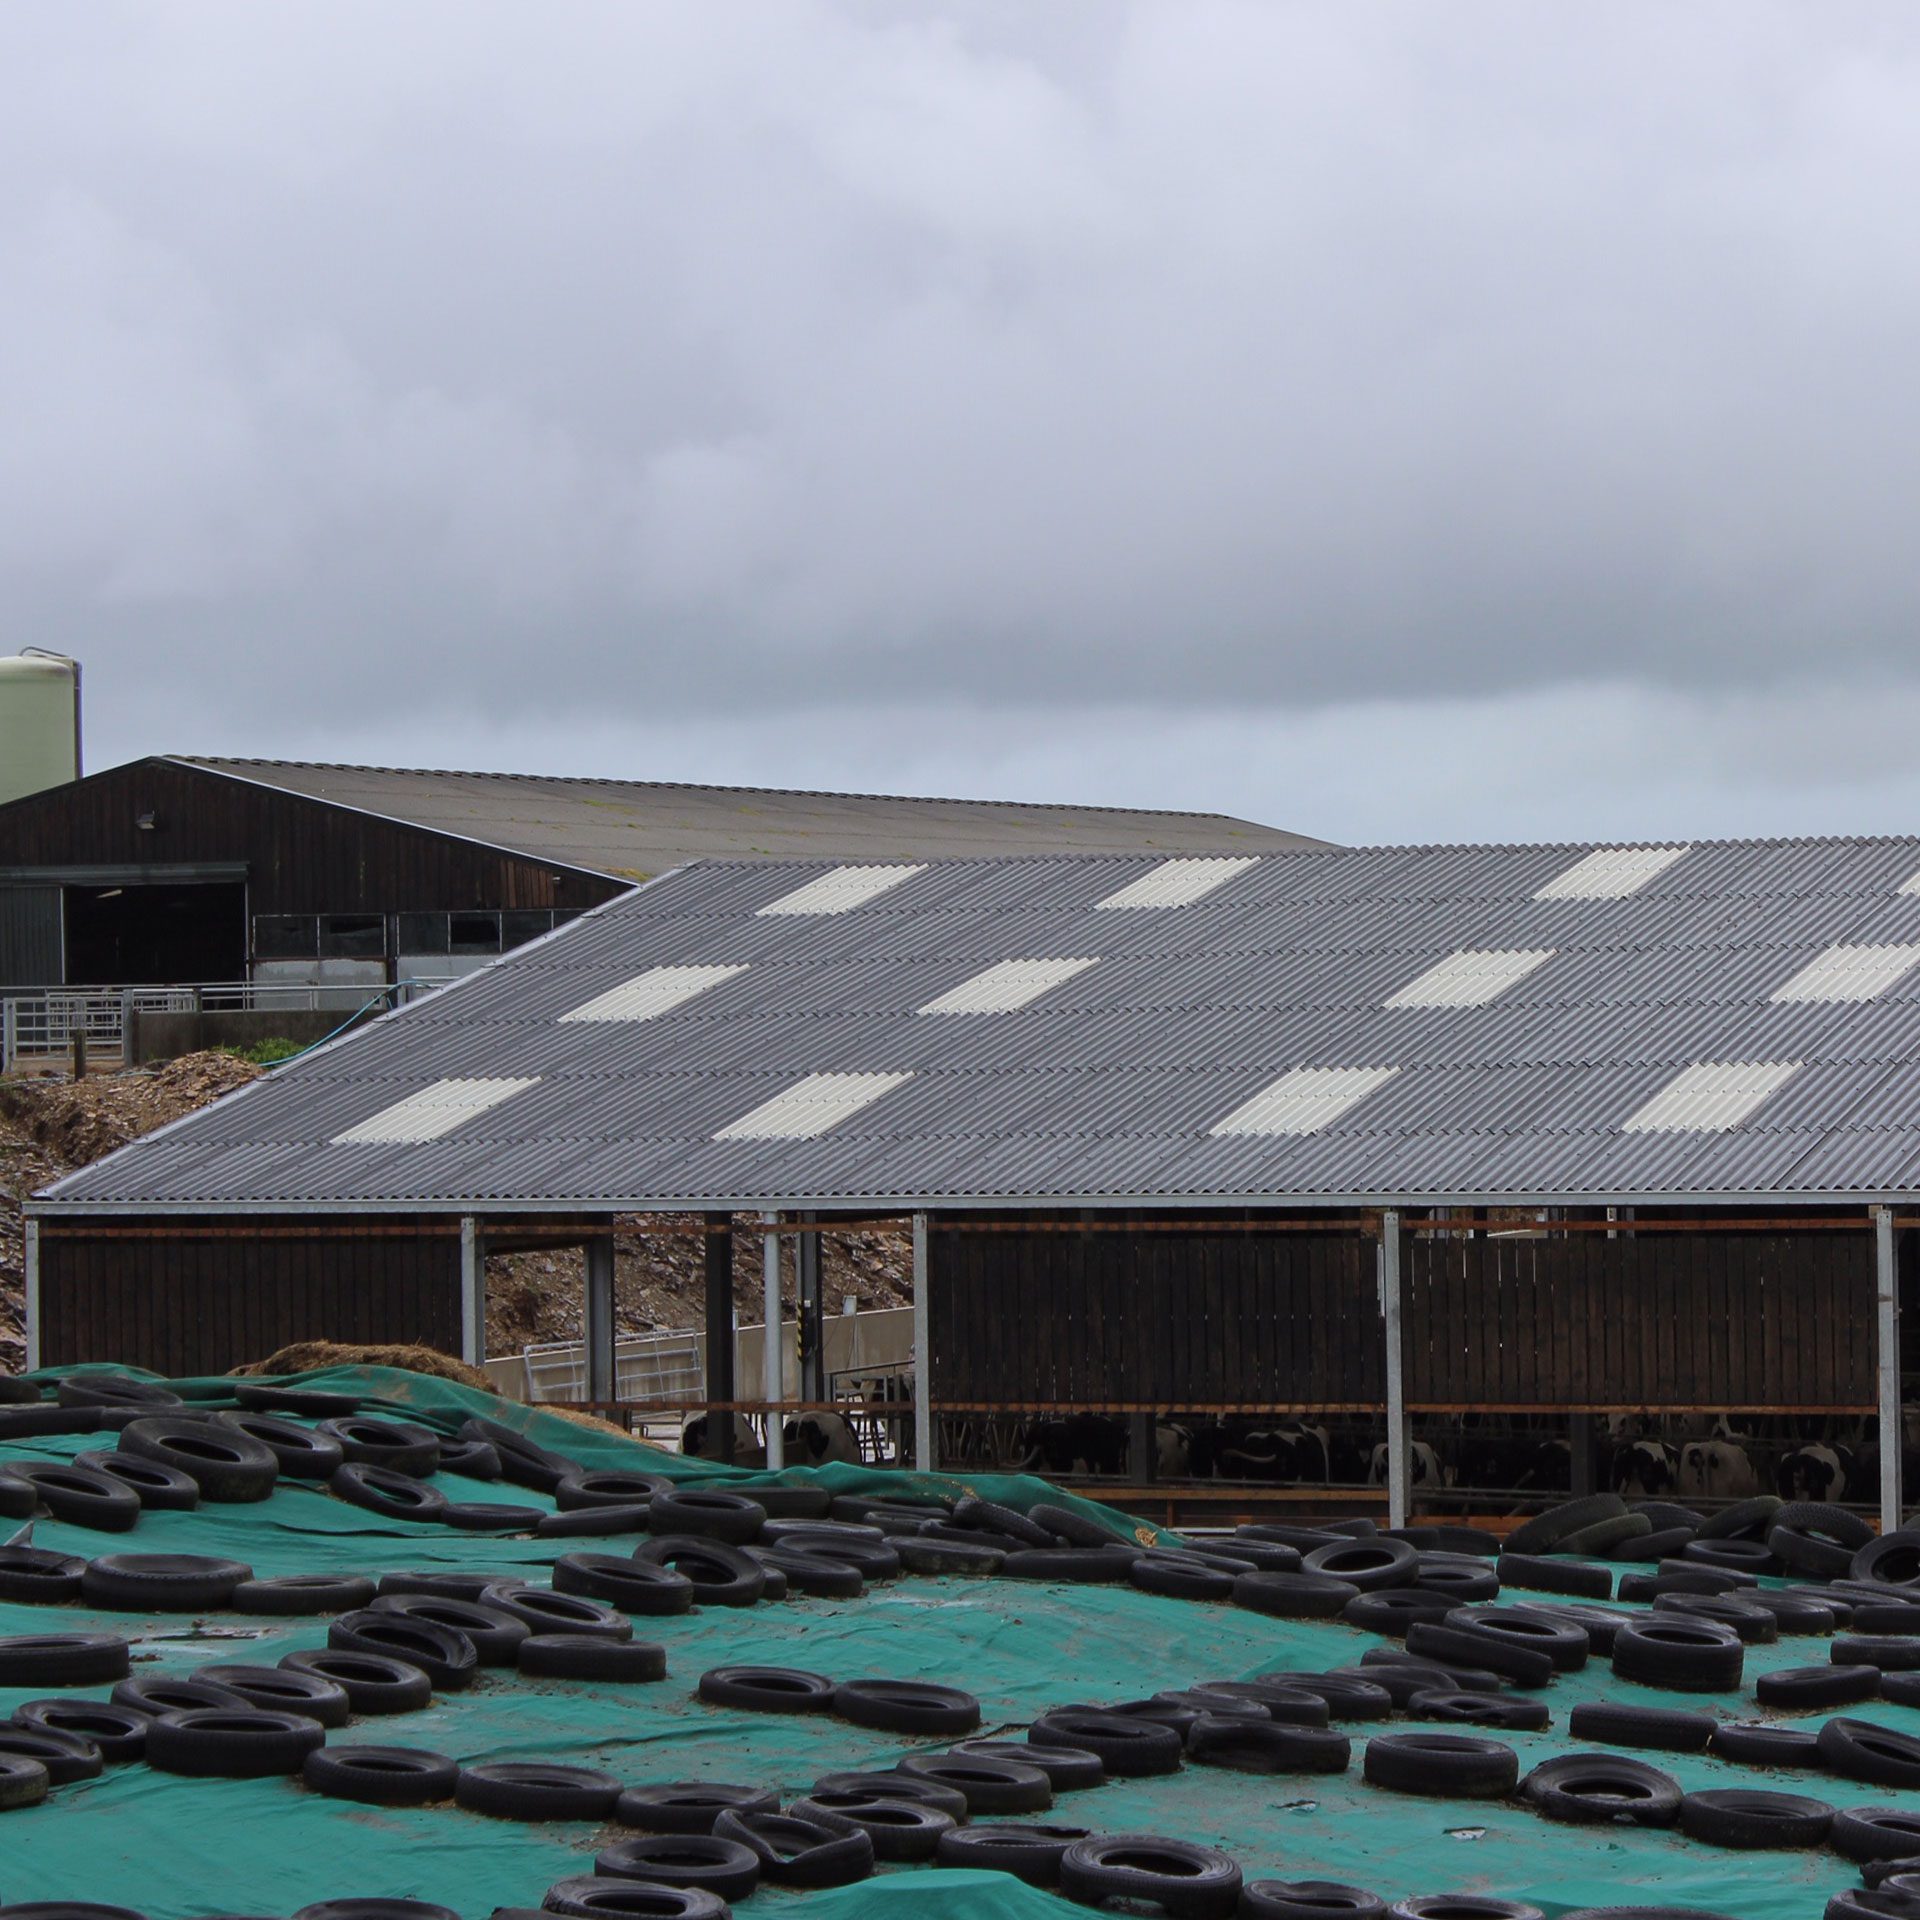  fibre cement roofing sheets installations